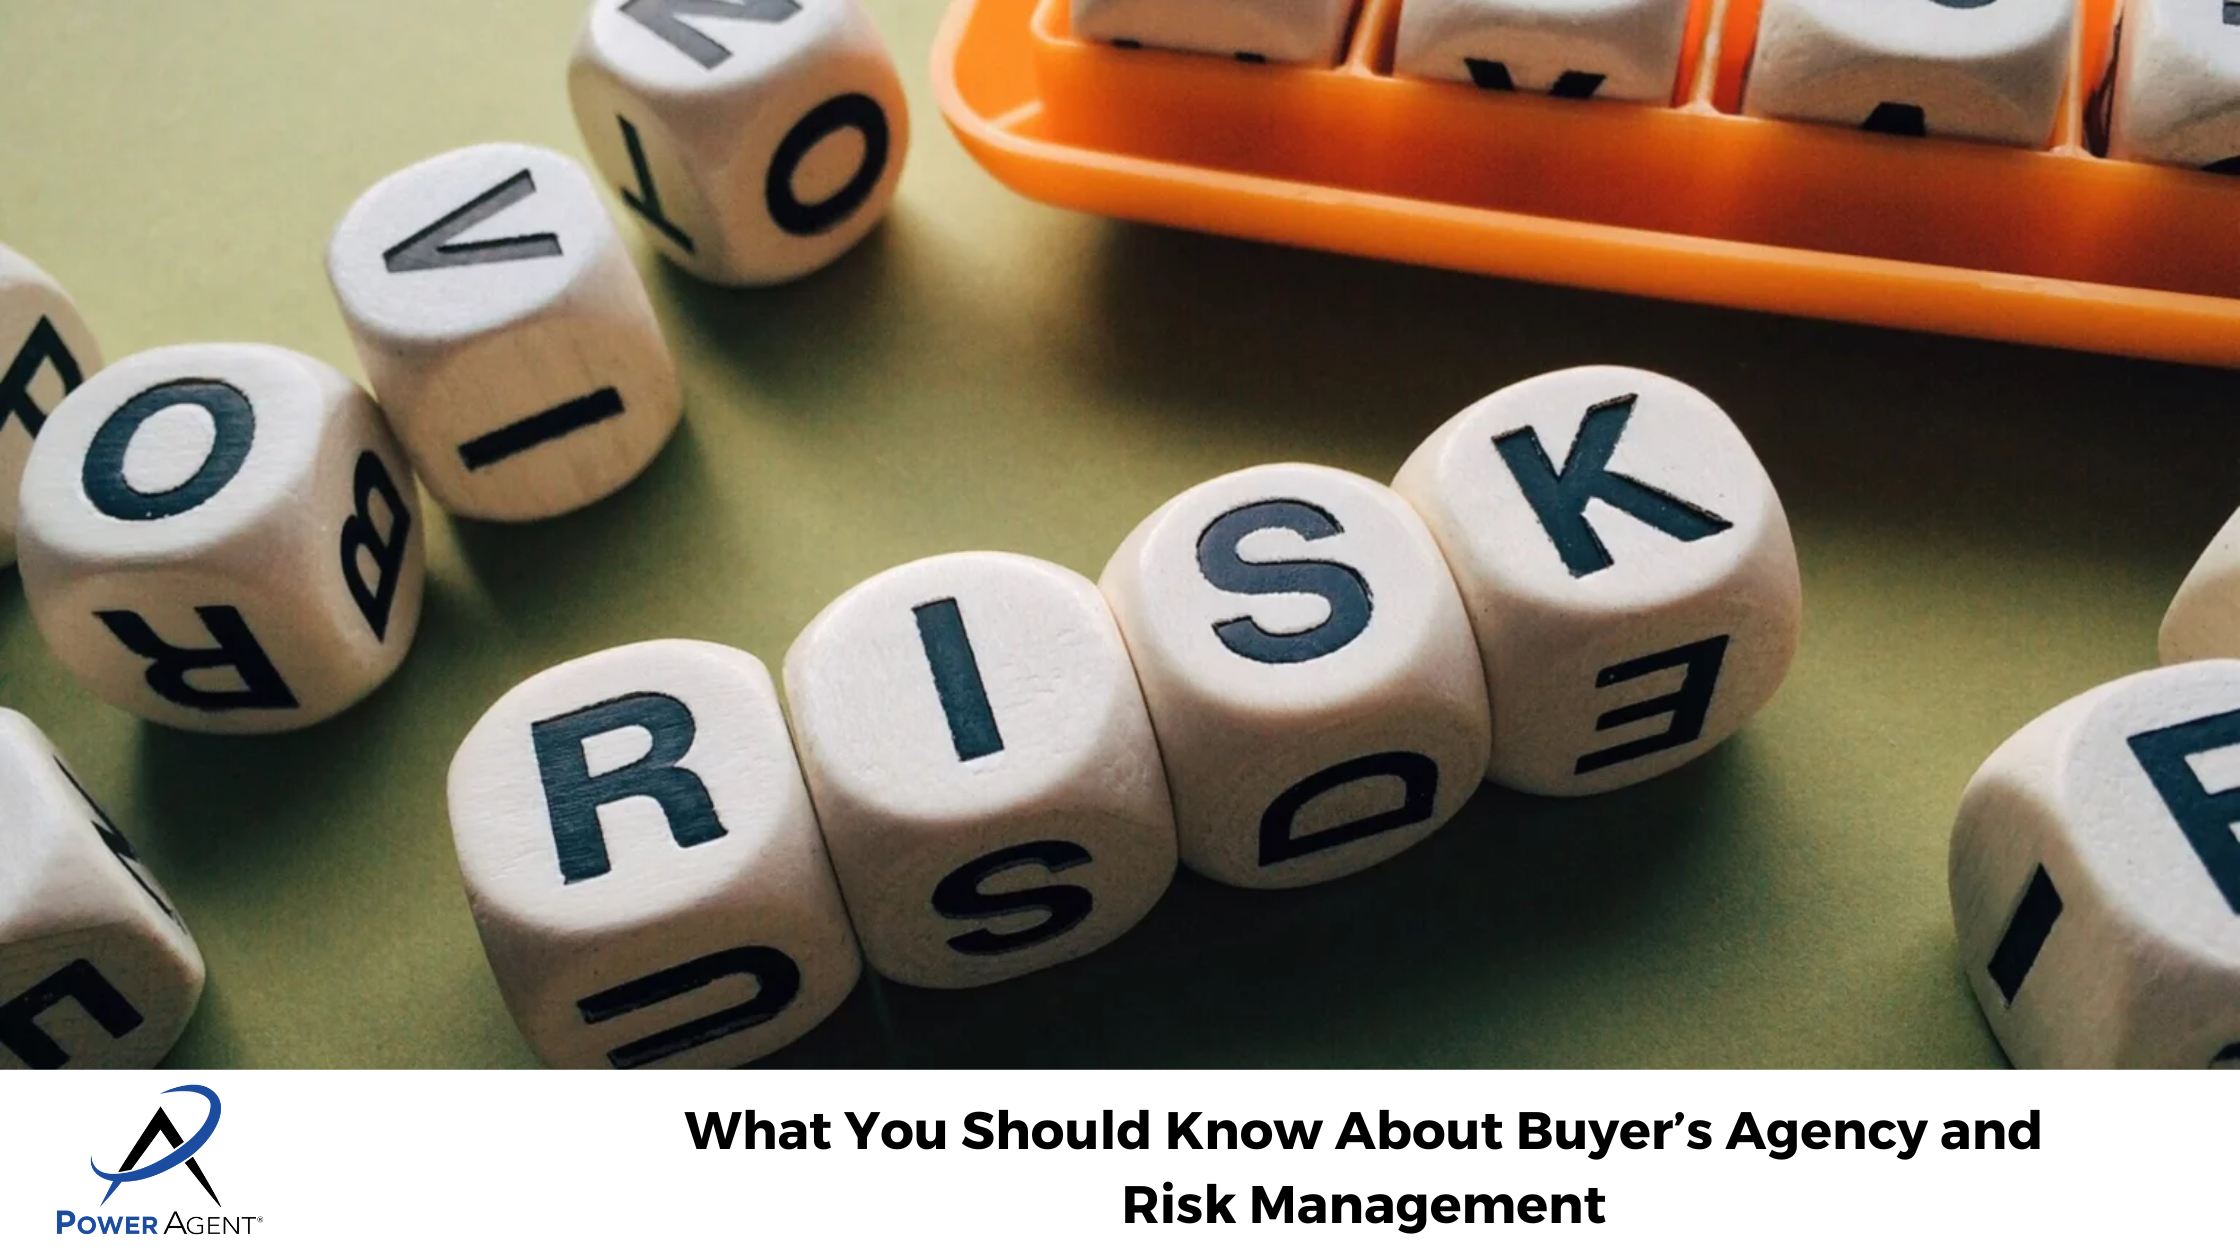 What You Should Know About Buyer’s Agency and Risk Management